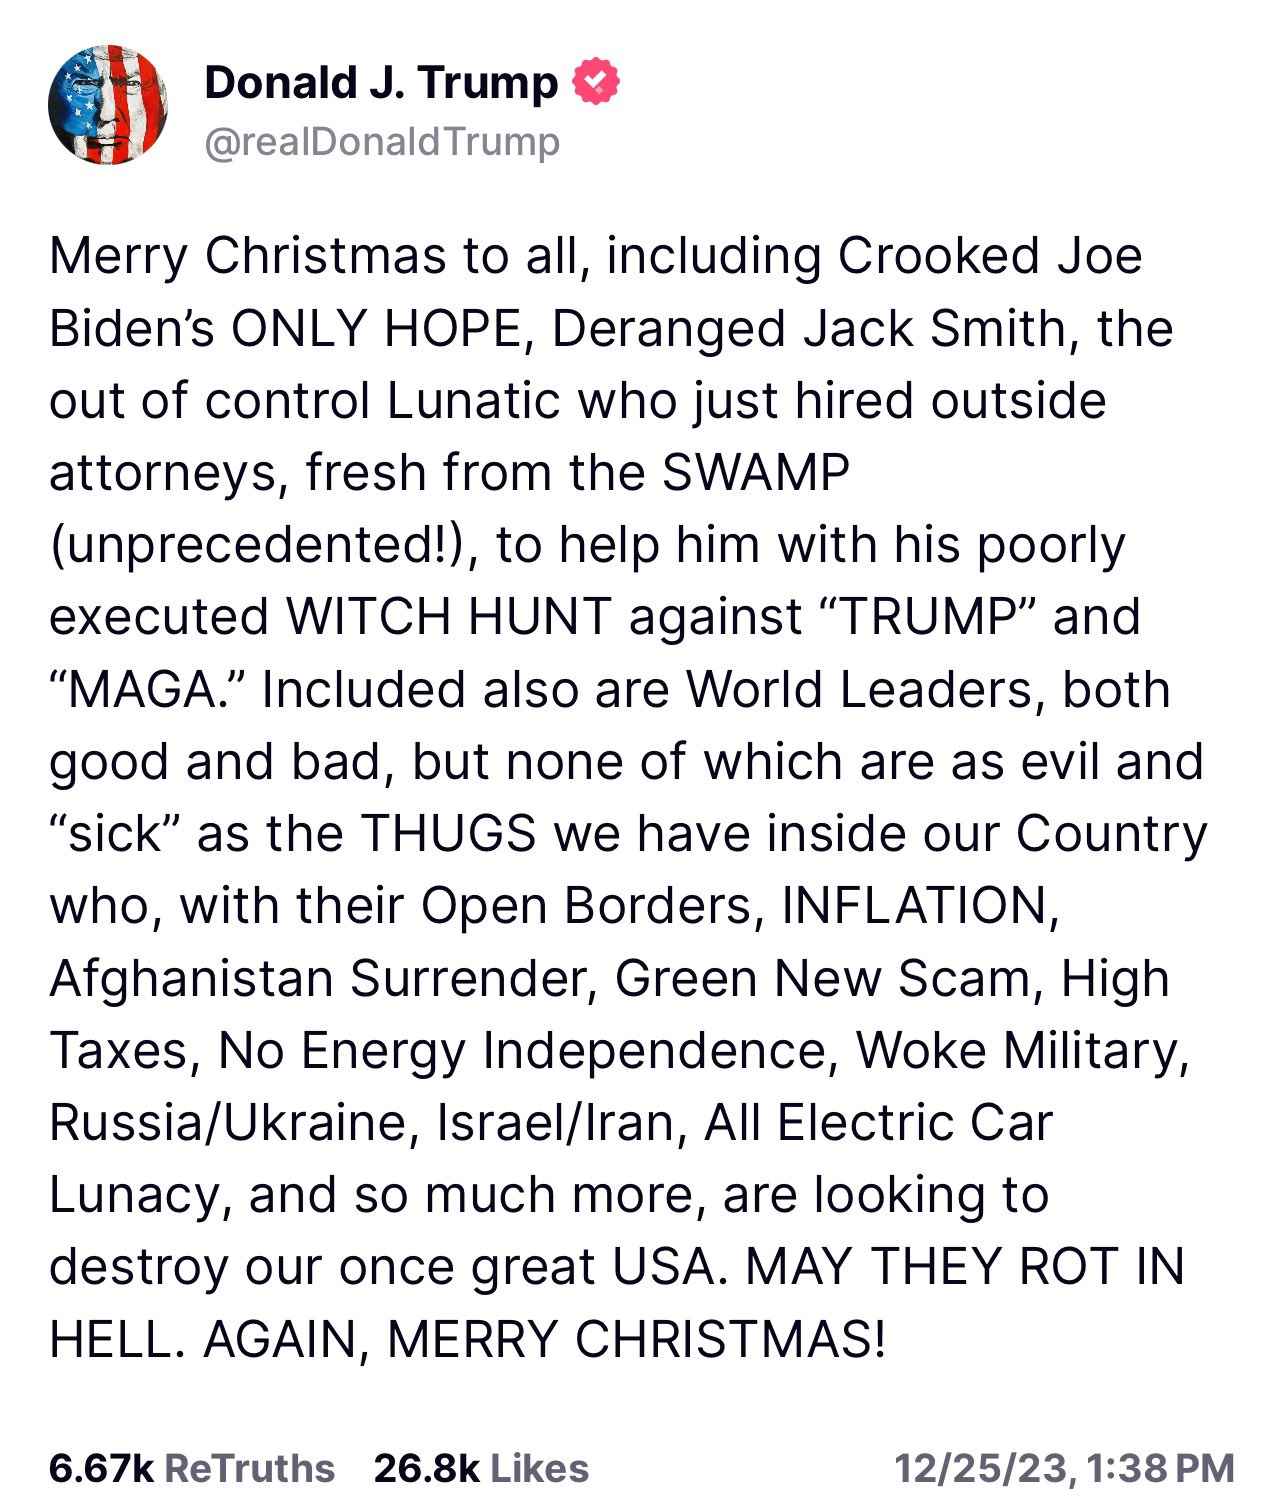 Jeremy Wallace on X: "“MAY THEY ROT IN HELL. AGAIN, MERRY CHRISTMAS!” Wow.  Quite the Christmas message from former President Donald Trump over on  Truth social on Christmas Day. https://t.co/ABh6ndYHvf" / X